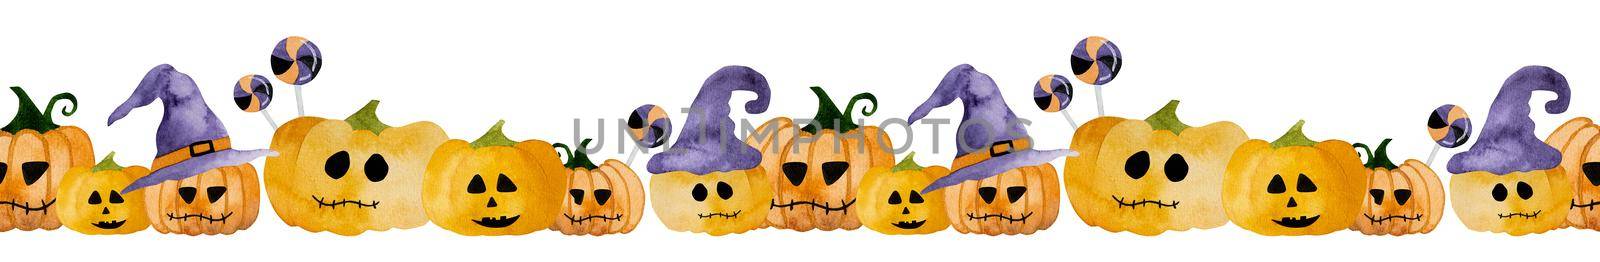 Halloween watercolor cute pumpkin illustration for funny holiday horizontal postcard. Autumn scary vegetables illustration for creepy decoration